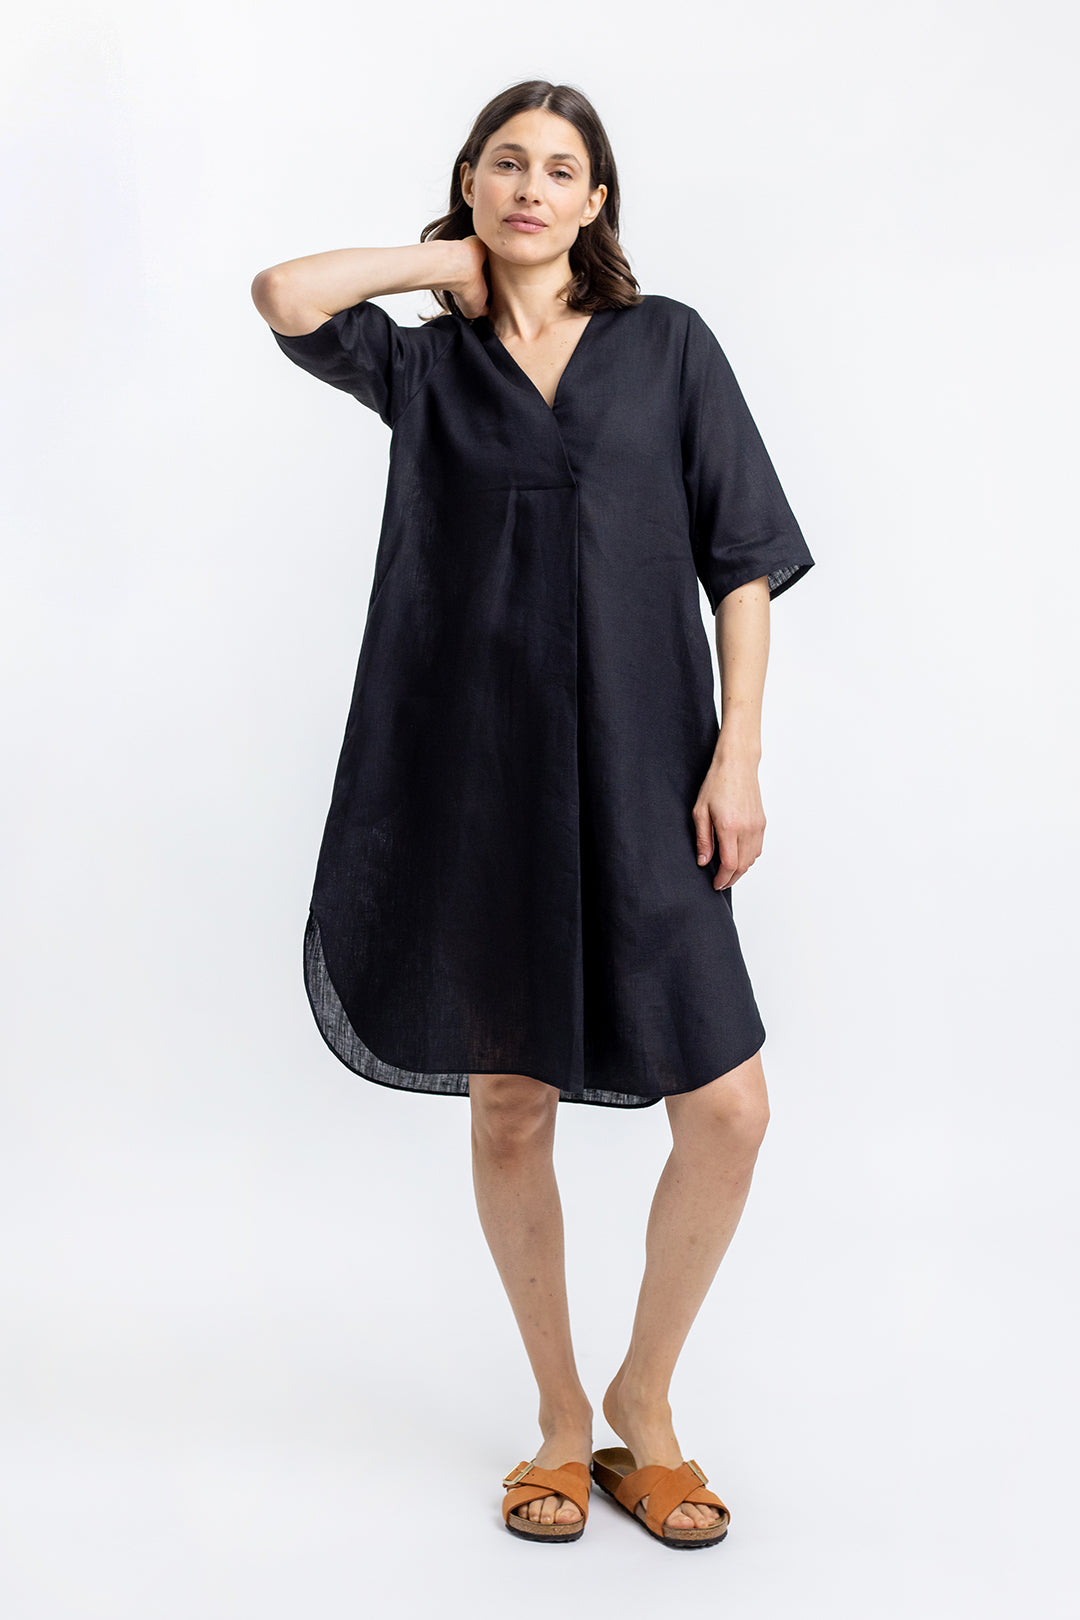 Black kaftan dress made from 100% linen by Rotholz